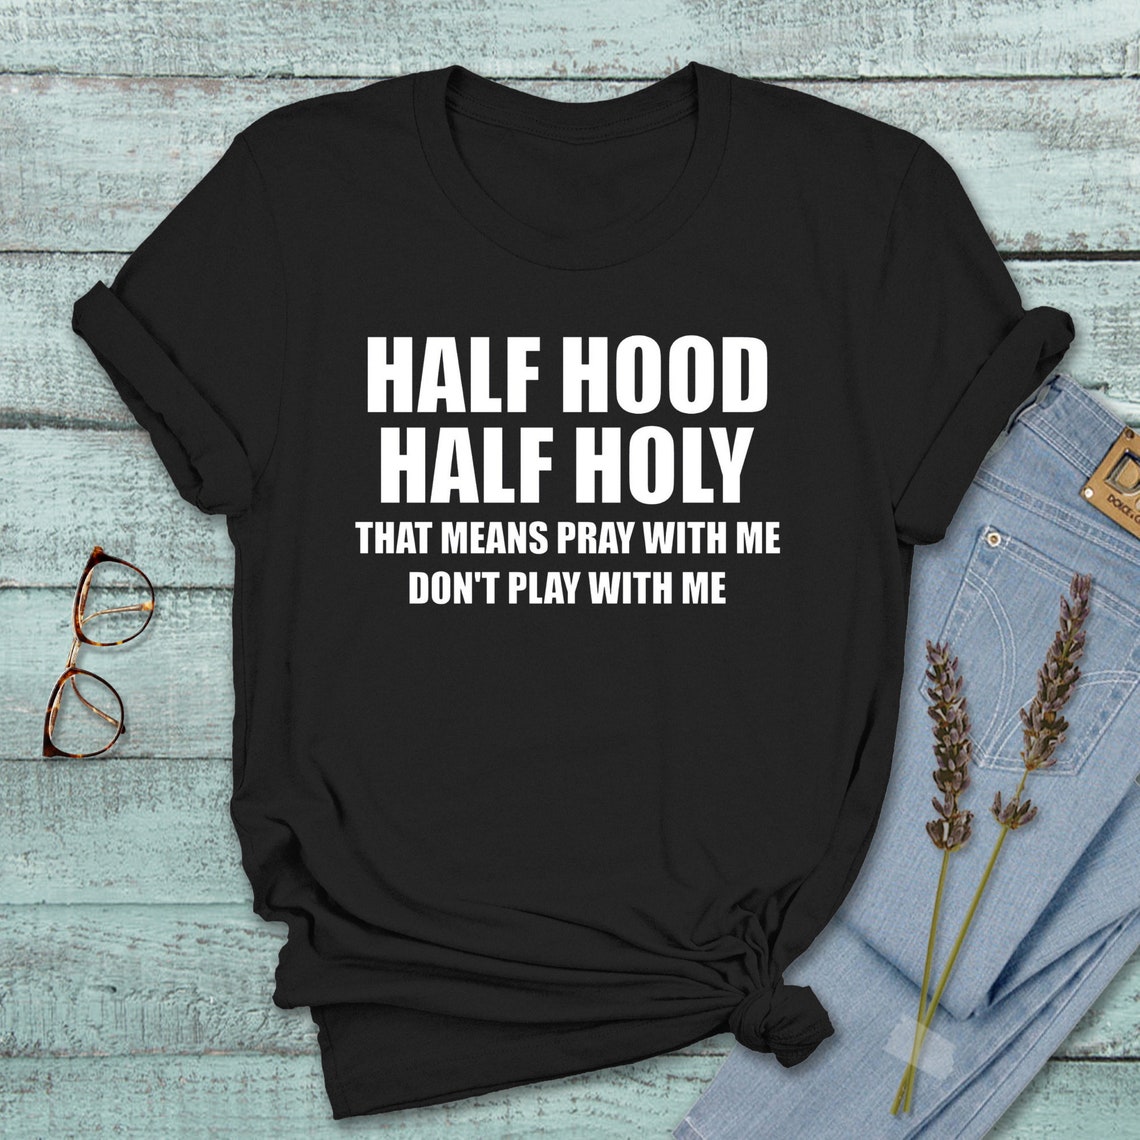 Half Hood Half Holy Holy Shirt Holy Enough To Pray For You | Etsy